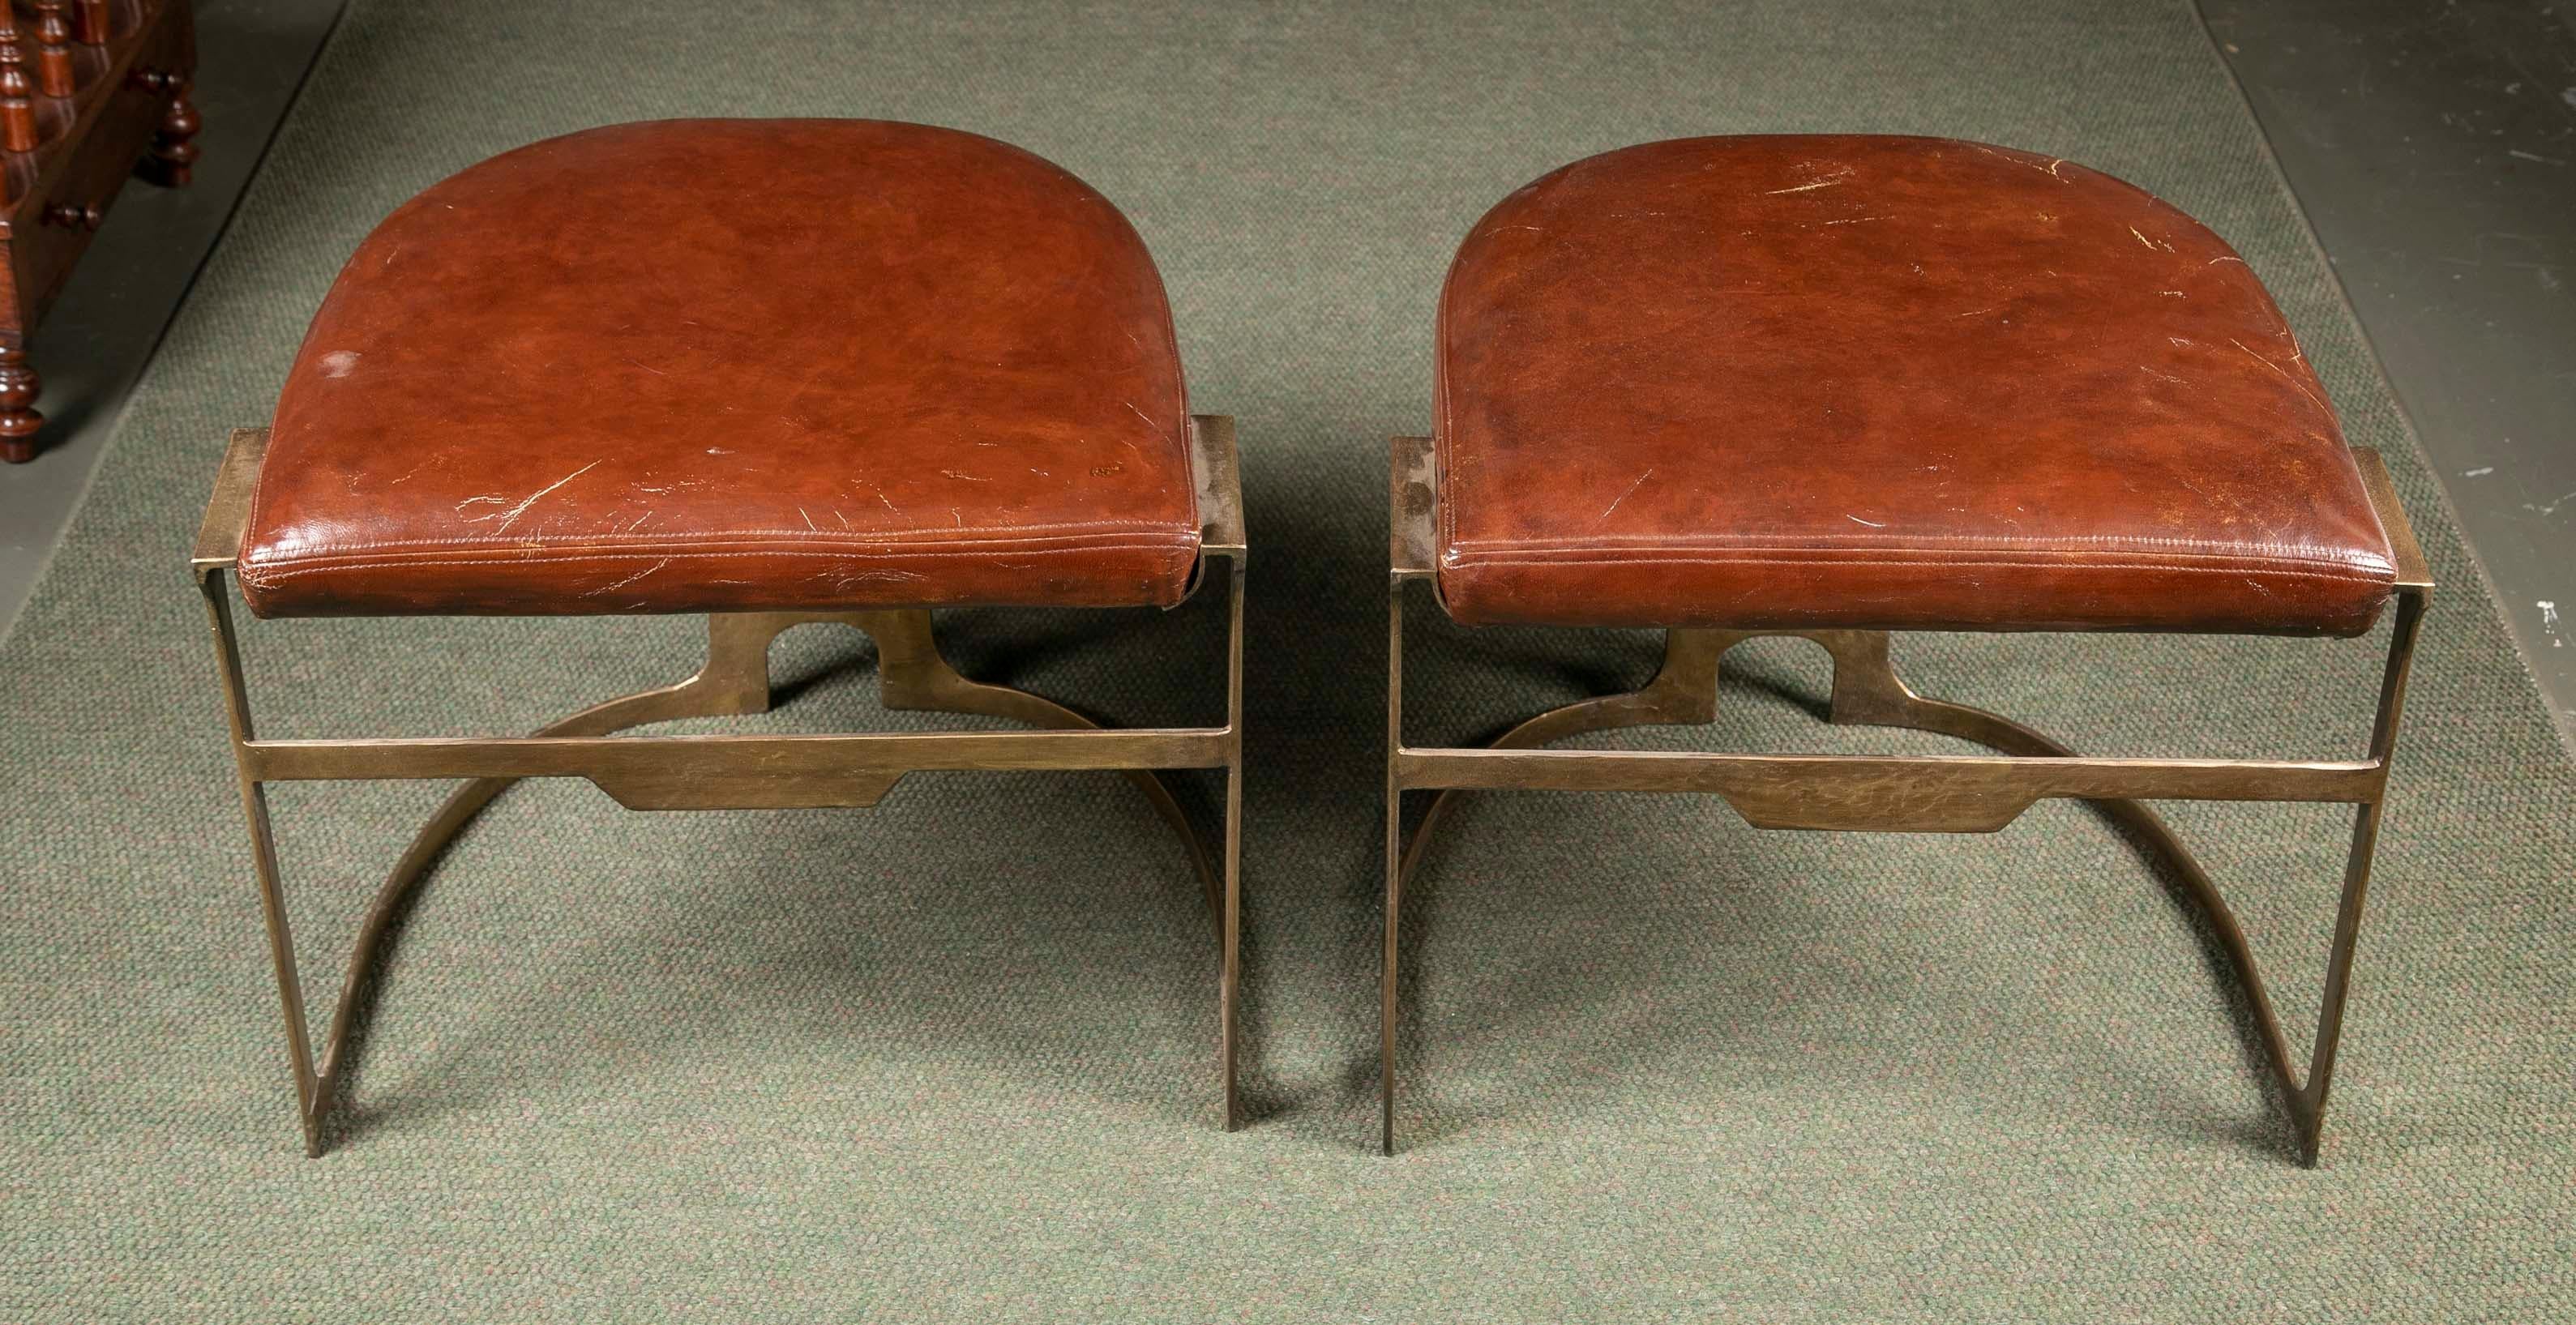 Pair of contemporary leather and patinated bronze stools.